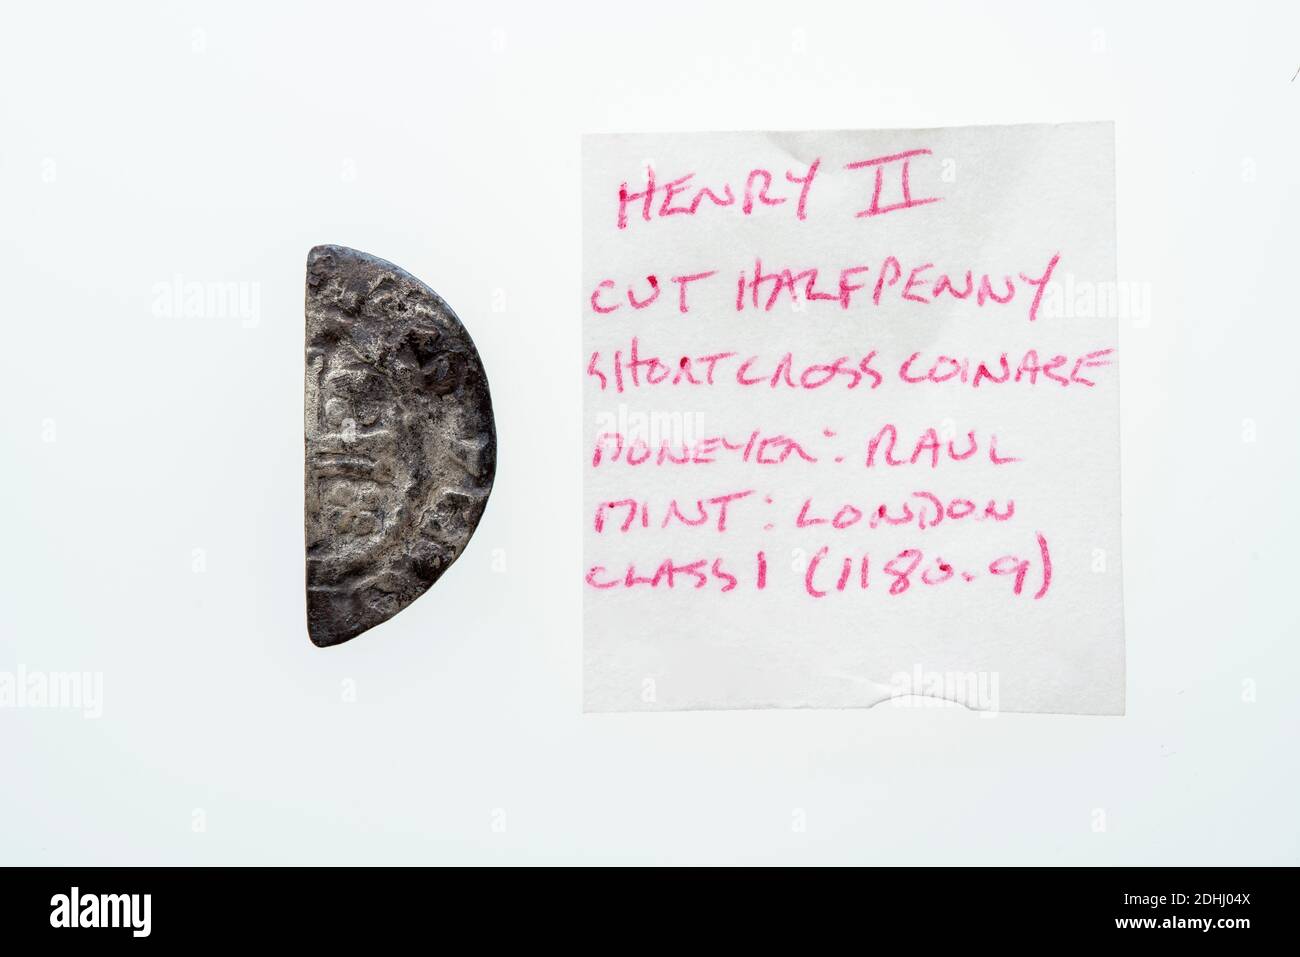 Silver short cross cut half penny English hammered coin of King Henry II of the 12th century dated around 1180- 1189  minted in London England isolate Stock Photo